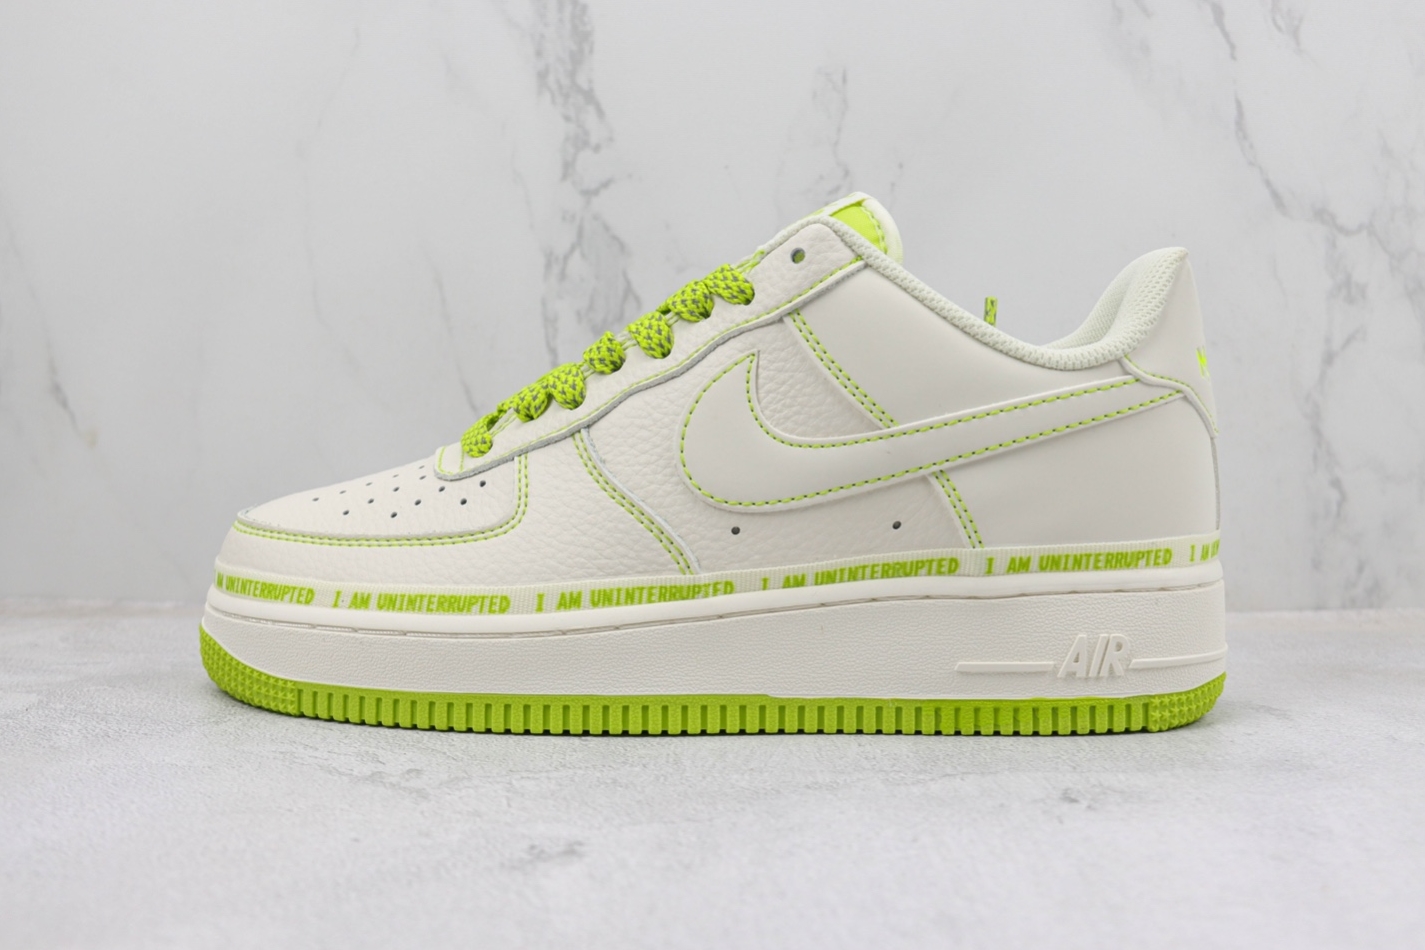 Uninterrupted x Nike Air Force 1 07 Low Rice White Green LJ2322-568: Stylish and Versatile Sneakers